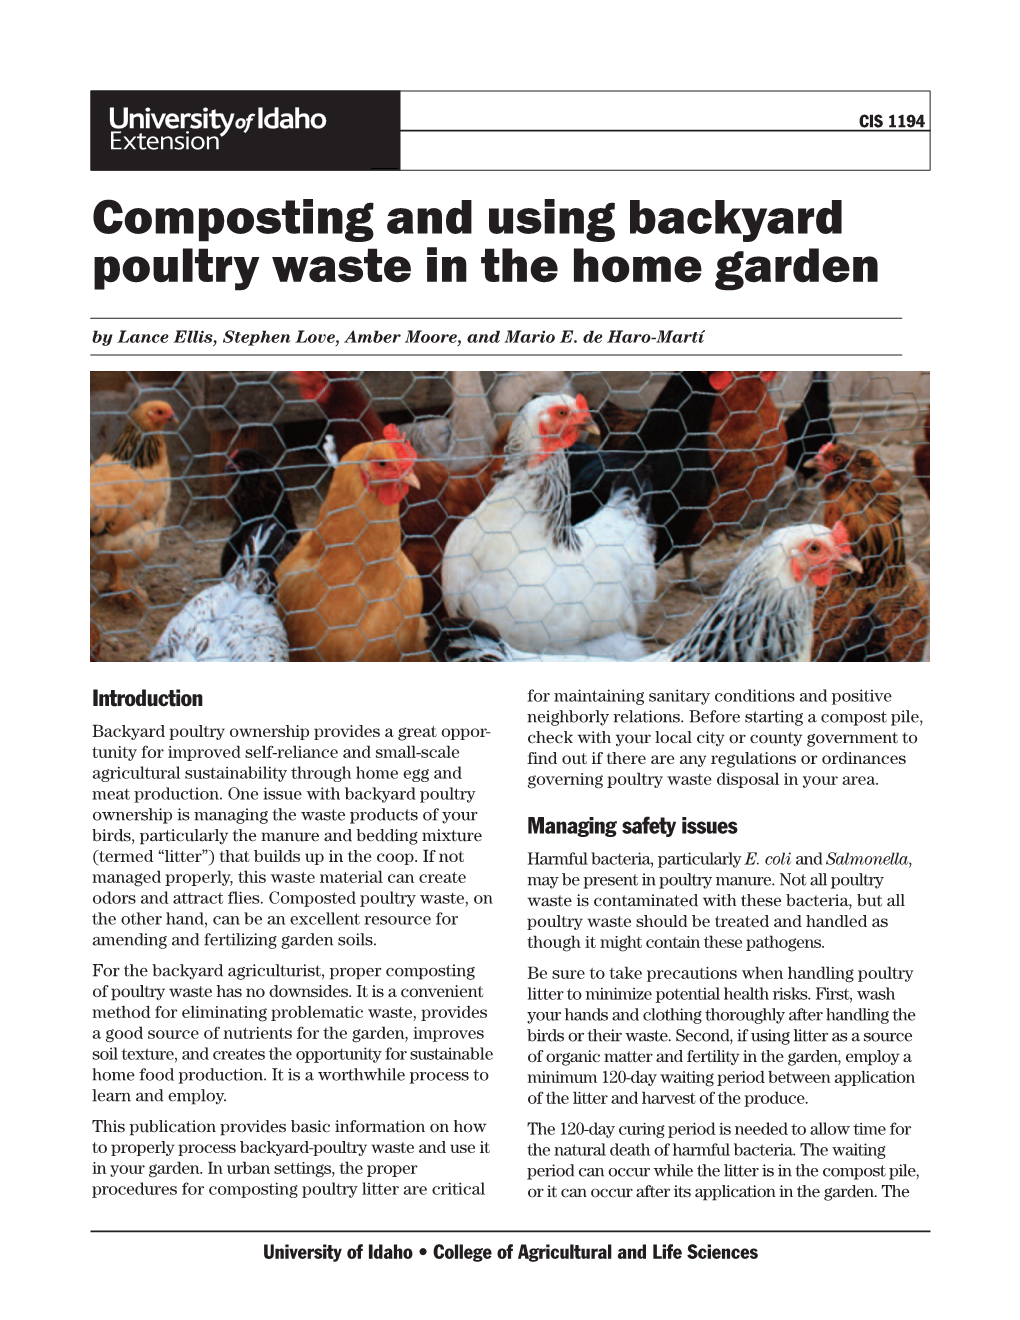 Composting and Using Backyard Poultry Waste in the Home Garden by Lance Ellis, Stephen Love, Amber Moore, and Mario E